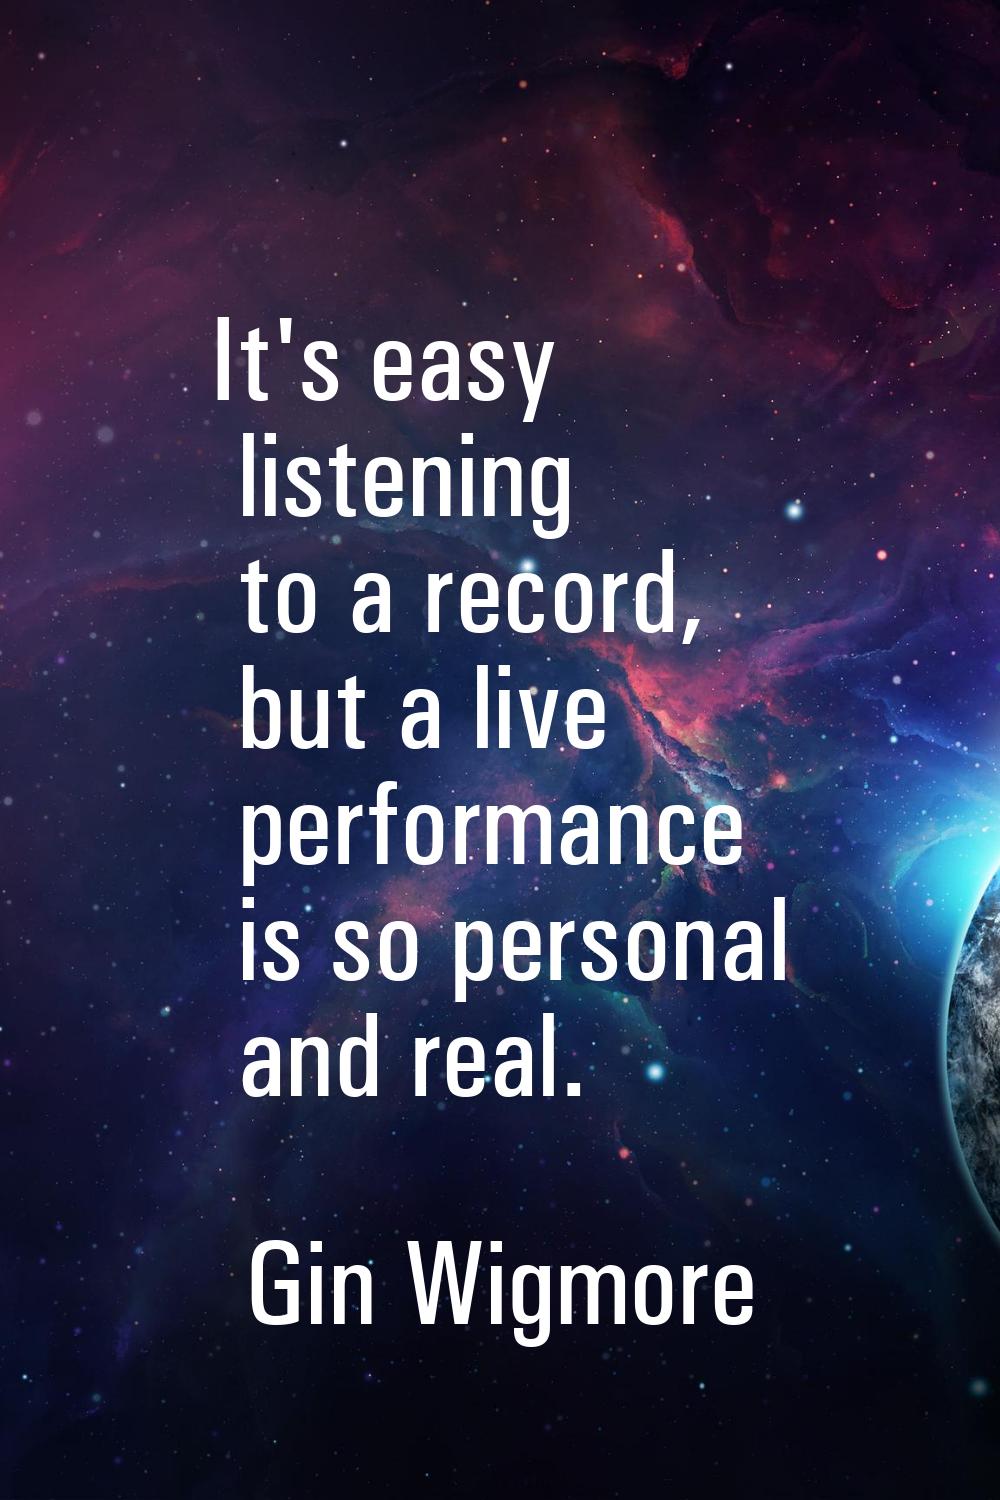 It's easy listening to a record, but a live performance is so personal and real.